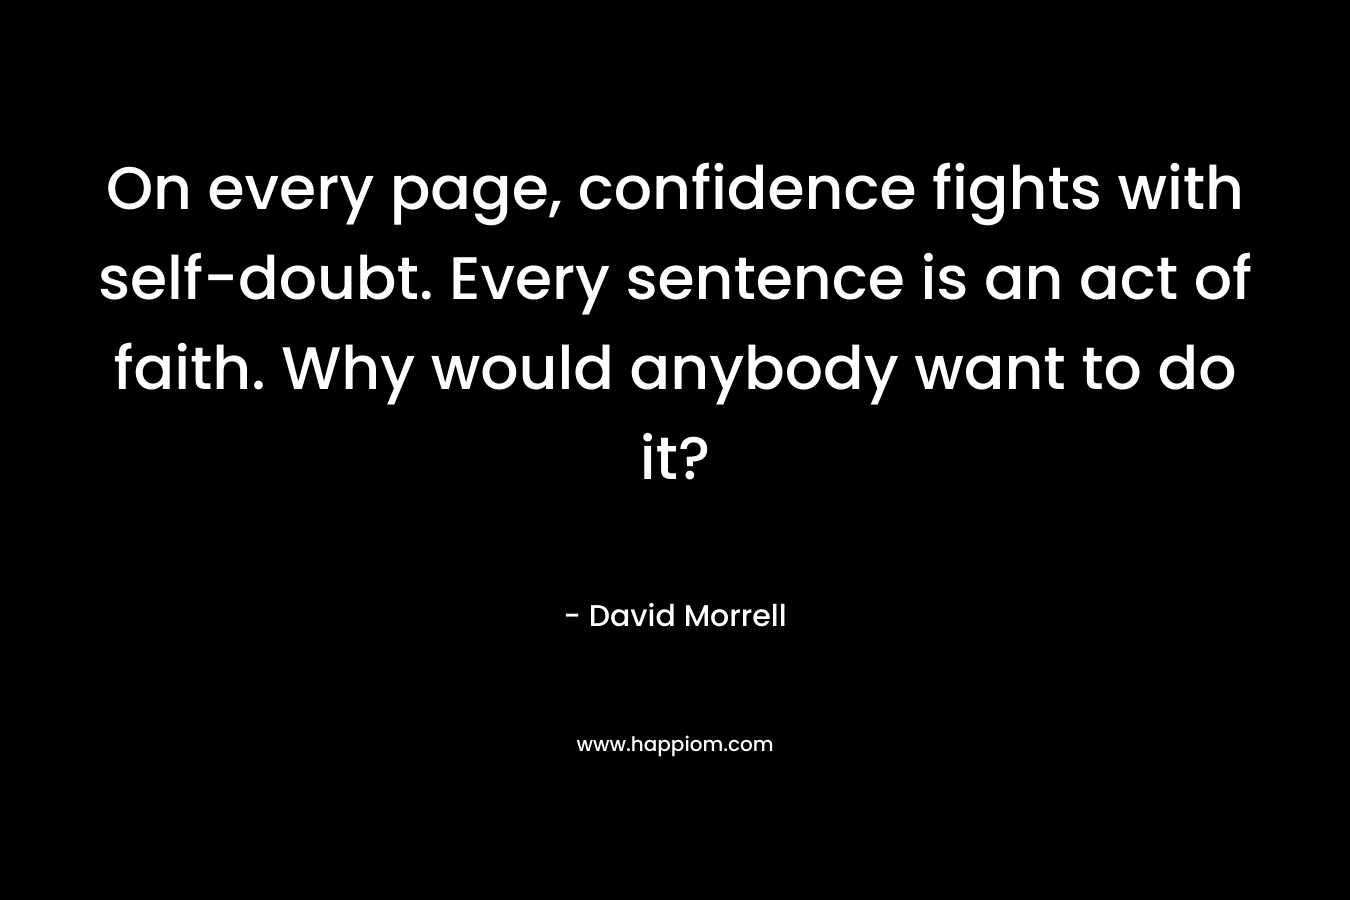 On every page, confidence fights with self-doubt. Every sentence is an act of faith. Why would anybody want to do it?